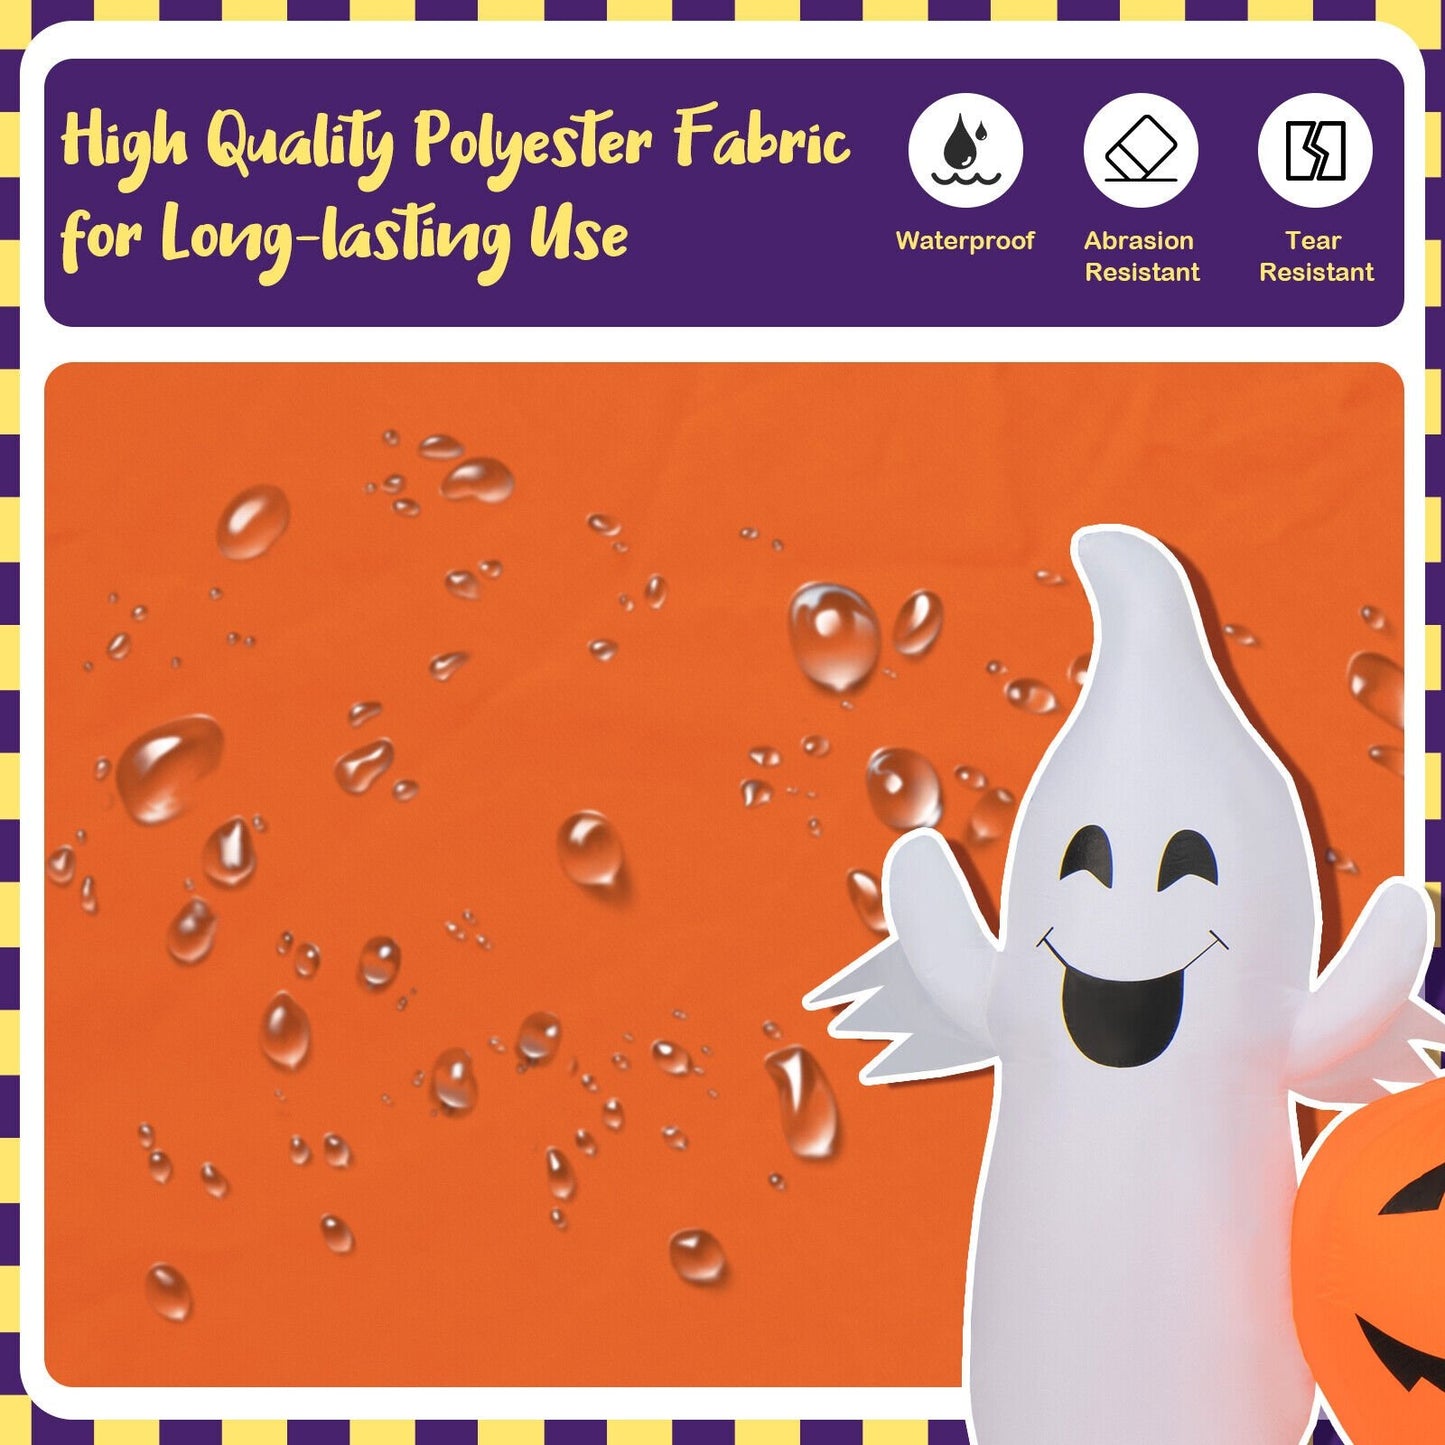 9 Feet Long Halloween Inflatable Pumpkins with 2 Ghosts, Multicolor